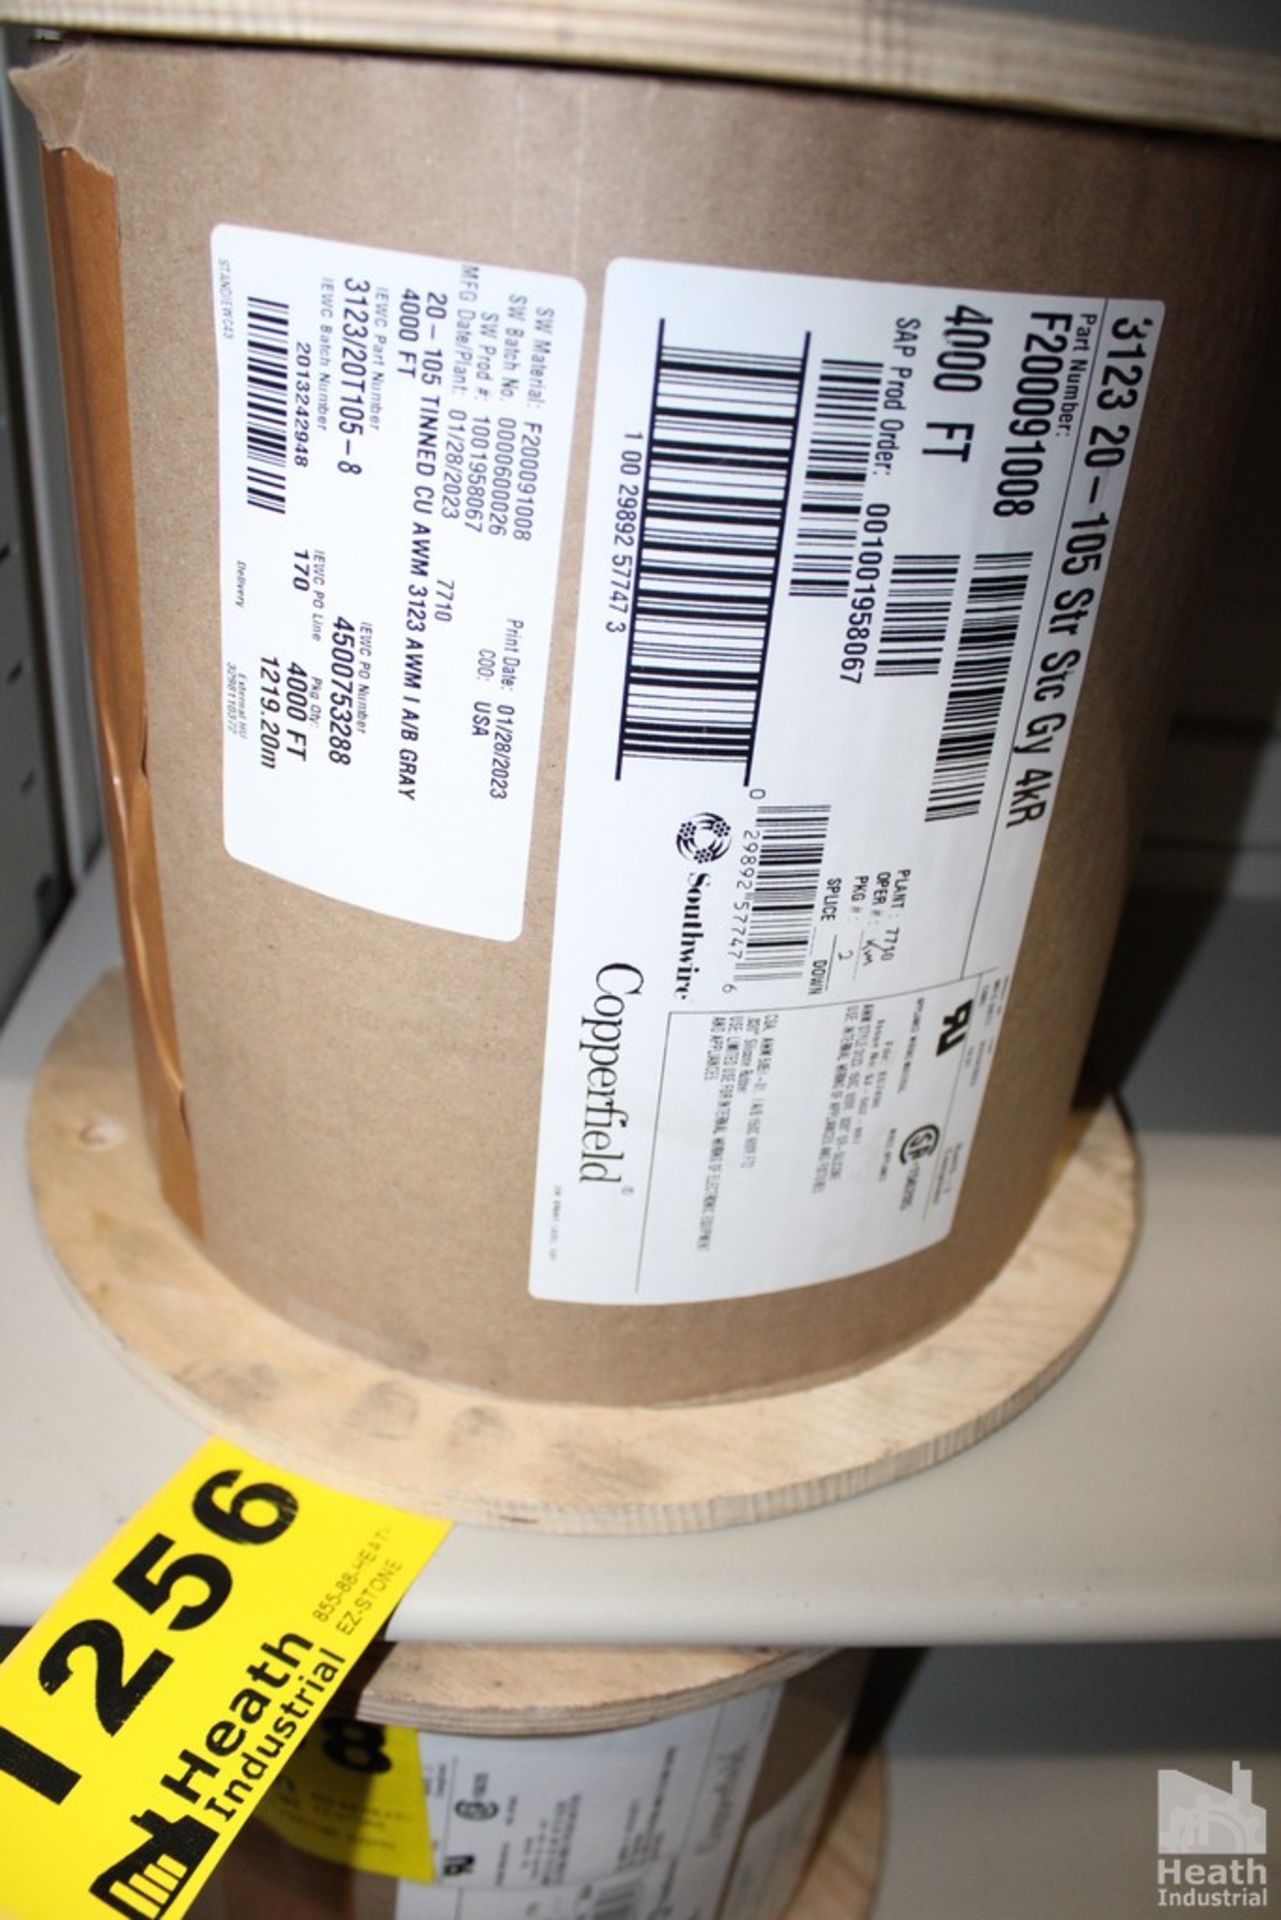 SPOOL OF COPPERFIELD PART NO. F2000091008 20AWG LEAD WIRE, 4,000 FT - Image 3 of 3